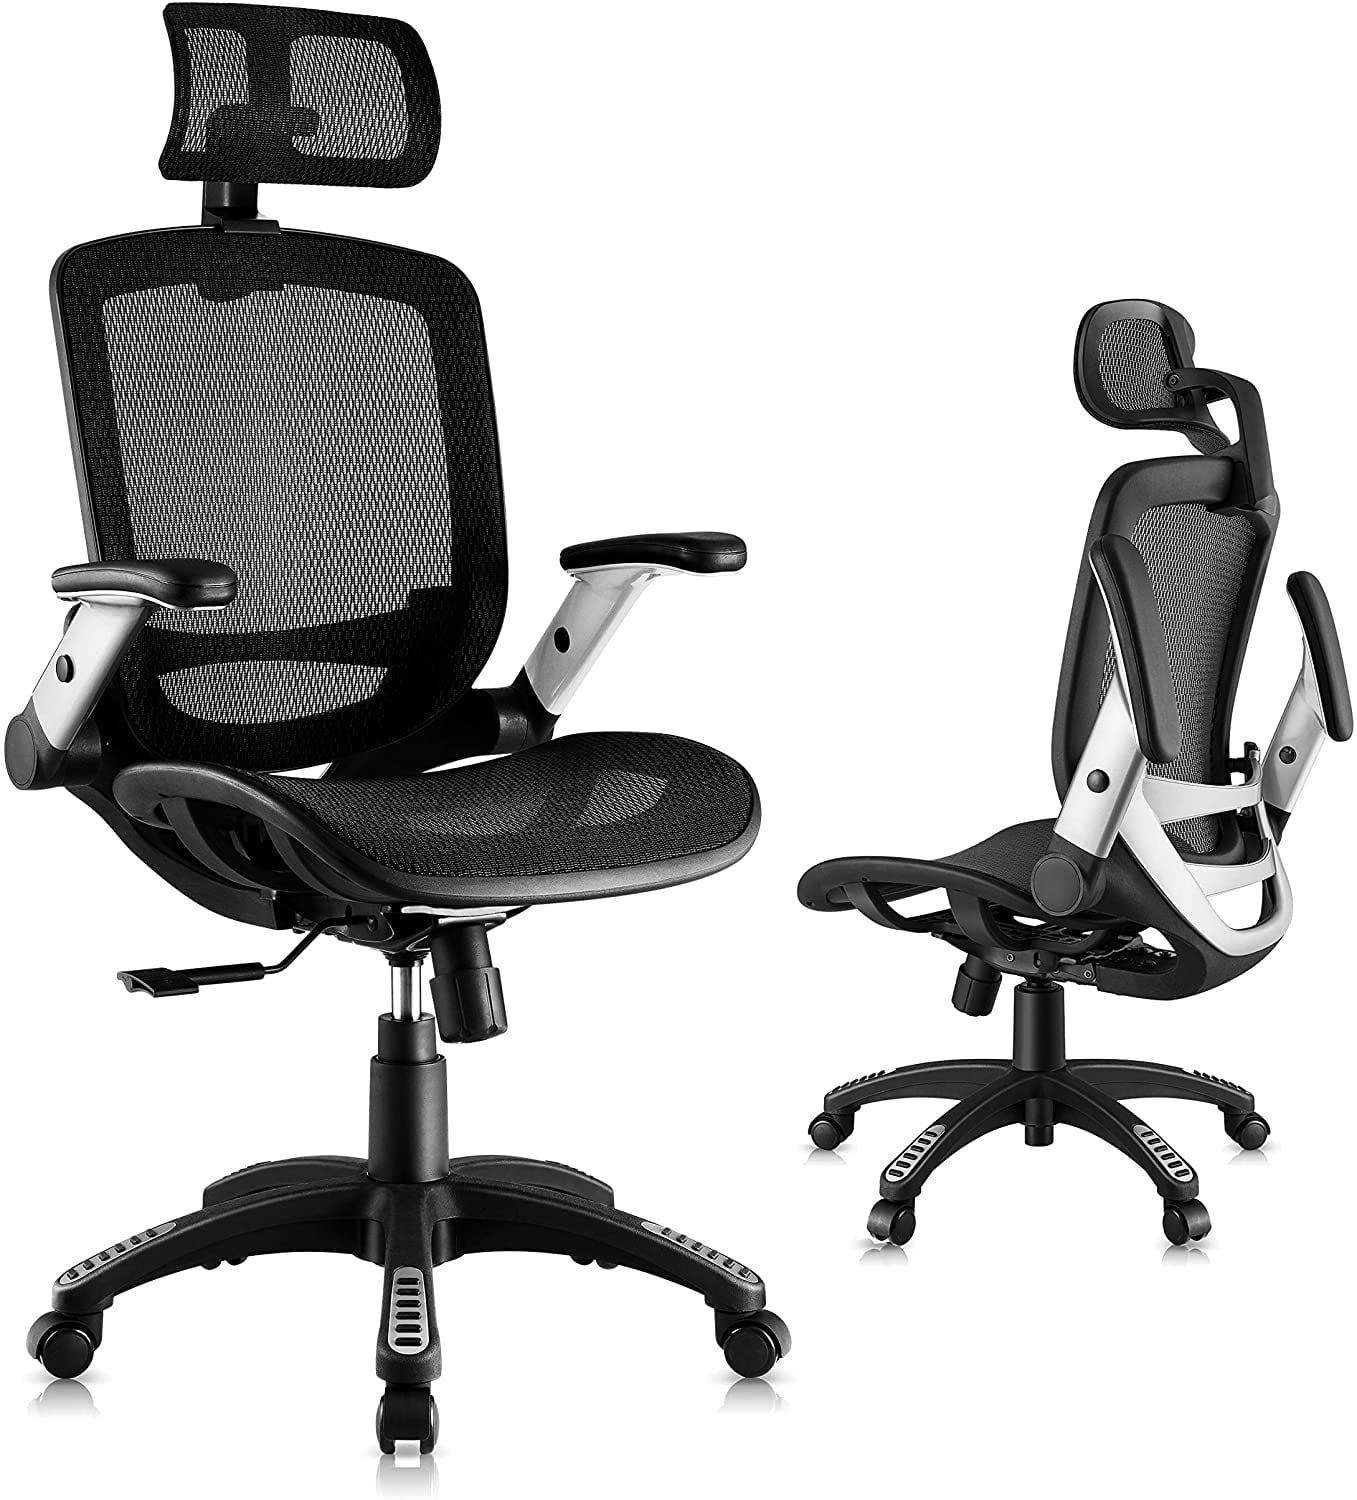 Ergonomic Office Chair Home Office Desk Chair Mid-Back Computer Chair Mesh Swivel Task Chair with Wheels and Armrests Black